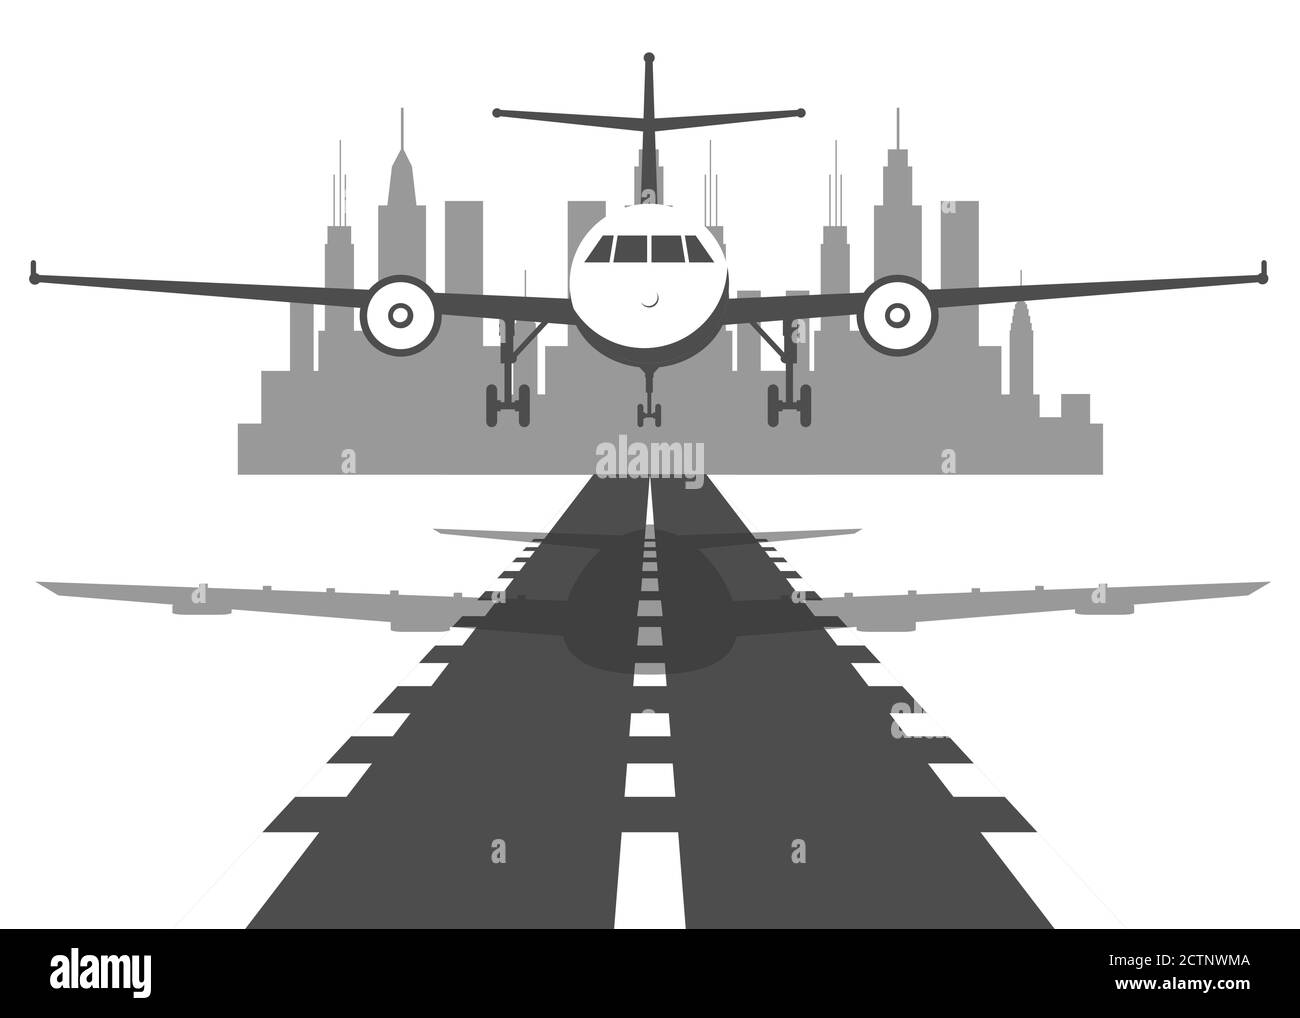 Passenger plane fly up over take-off runway from airport at sunset. Flat design illustration. Stock Vector